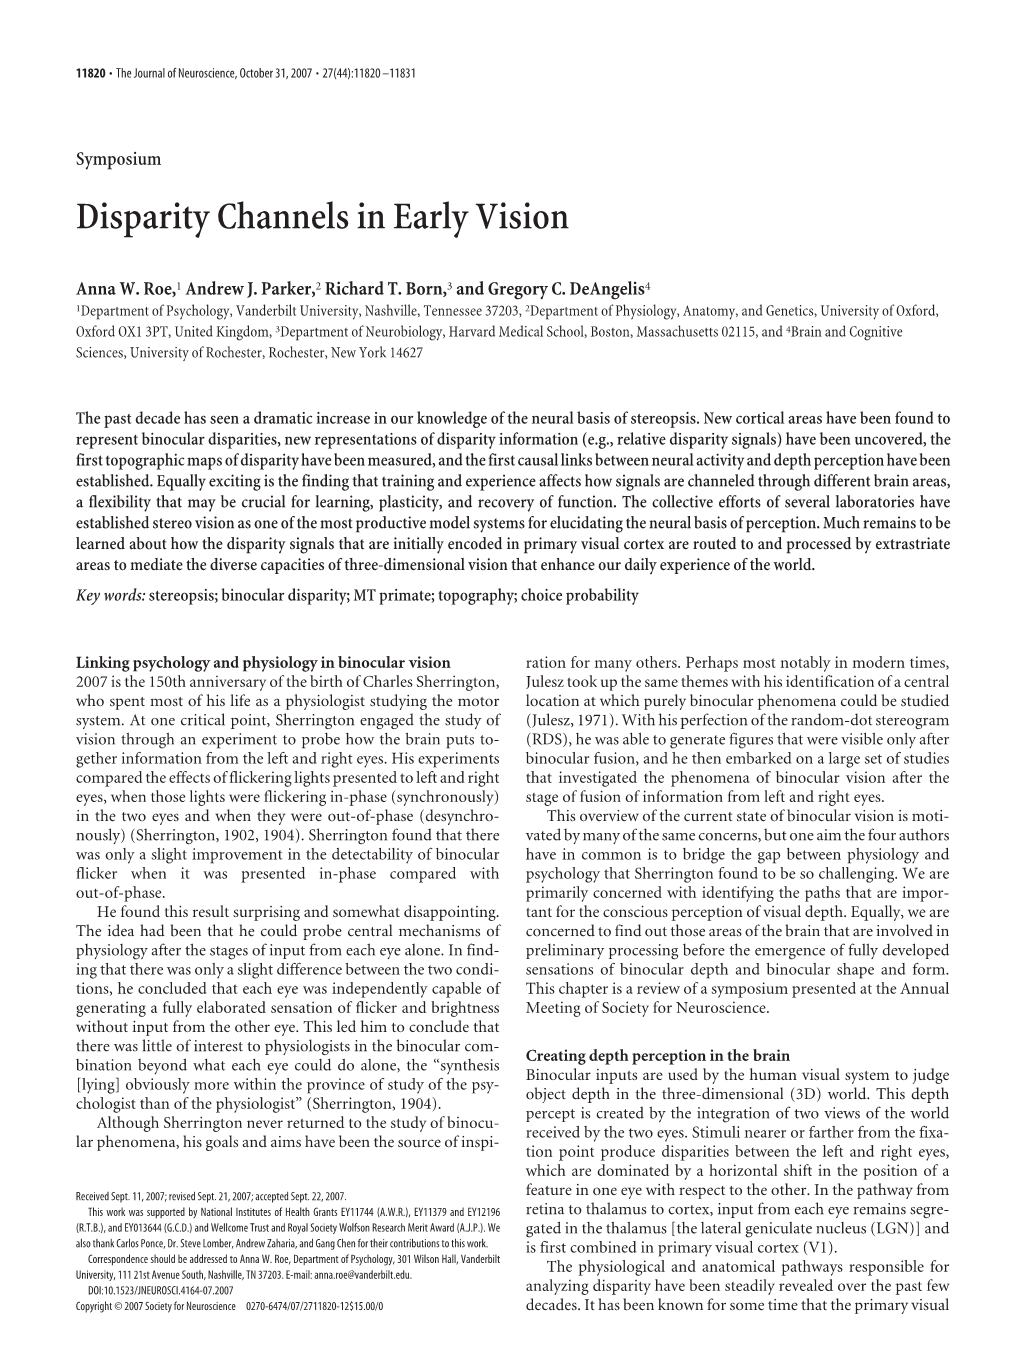 Disparity Channels in Early Vision